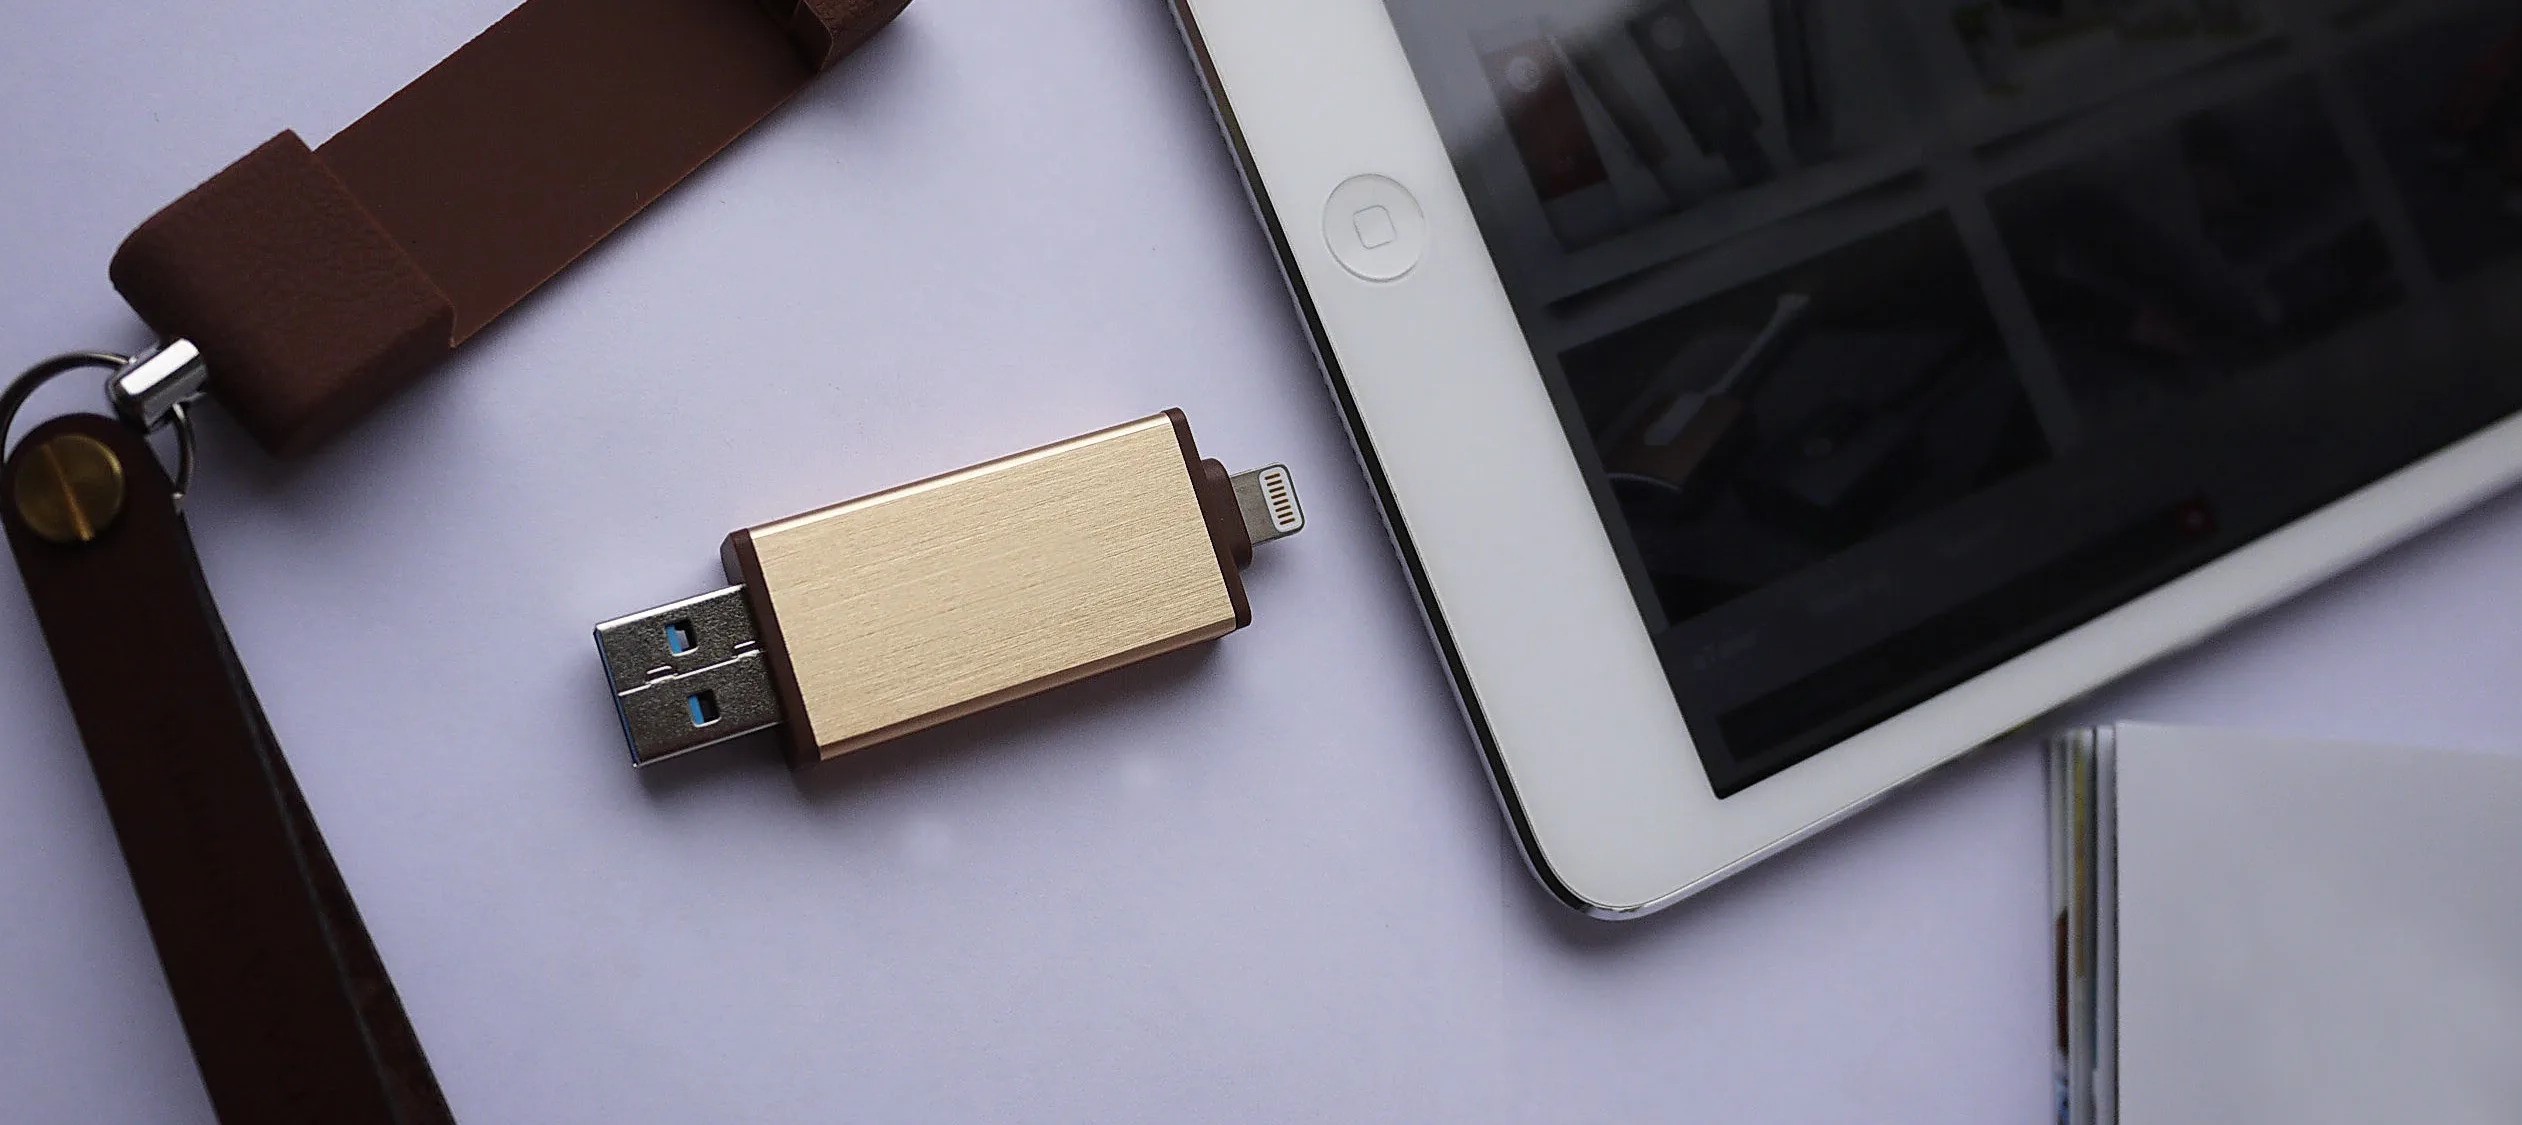 How To Connect Portable USB Devices To IPads & IPhones